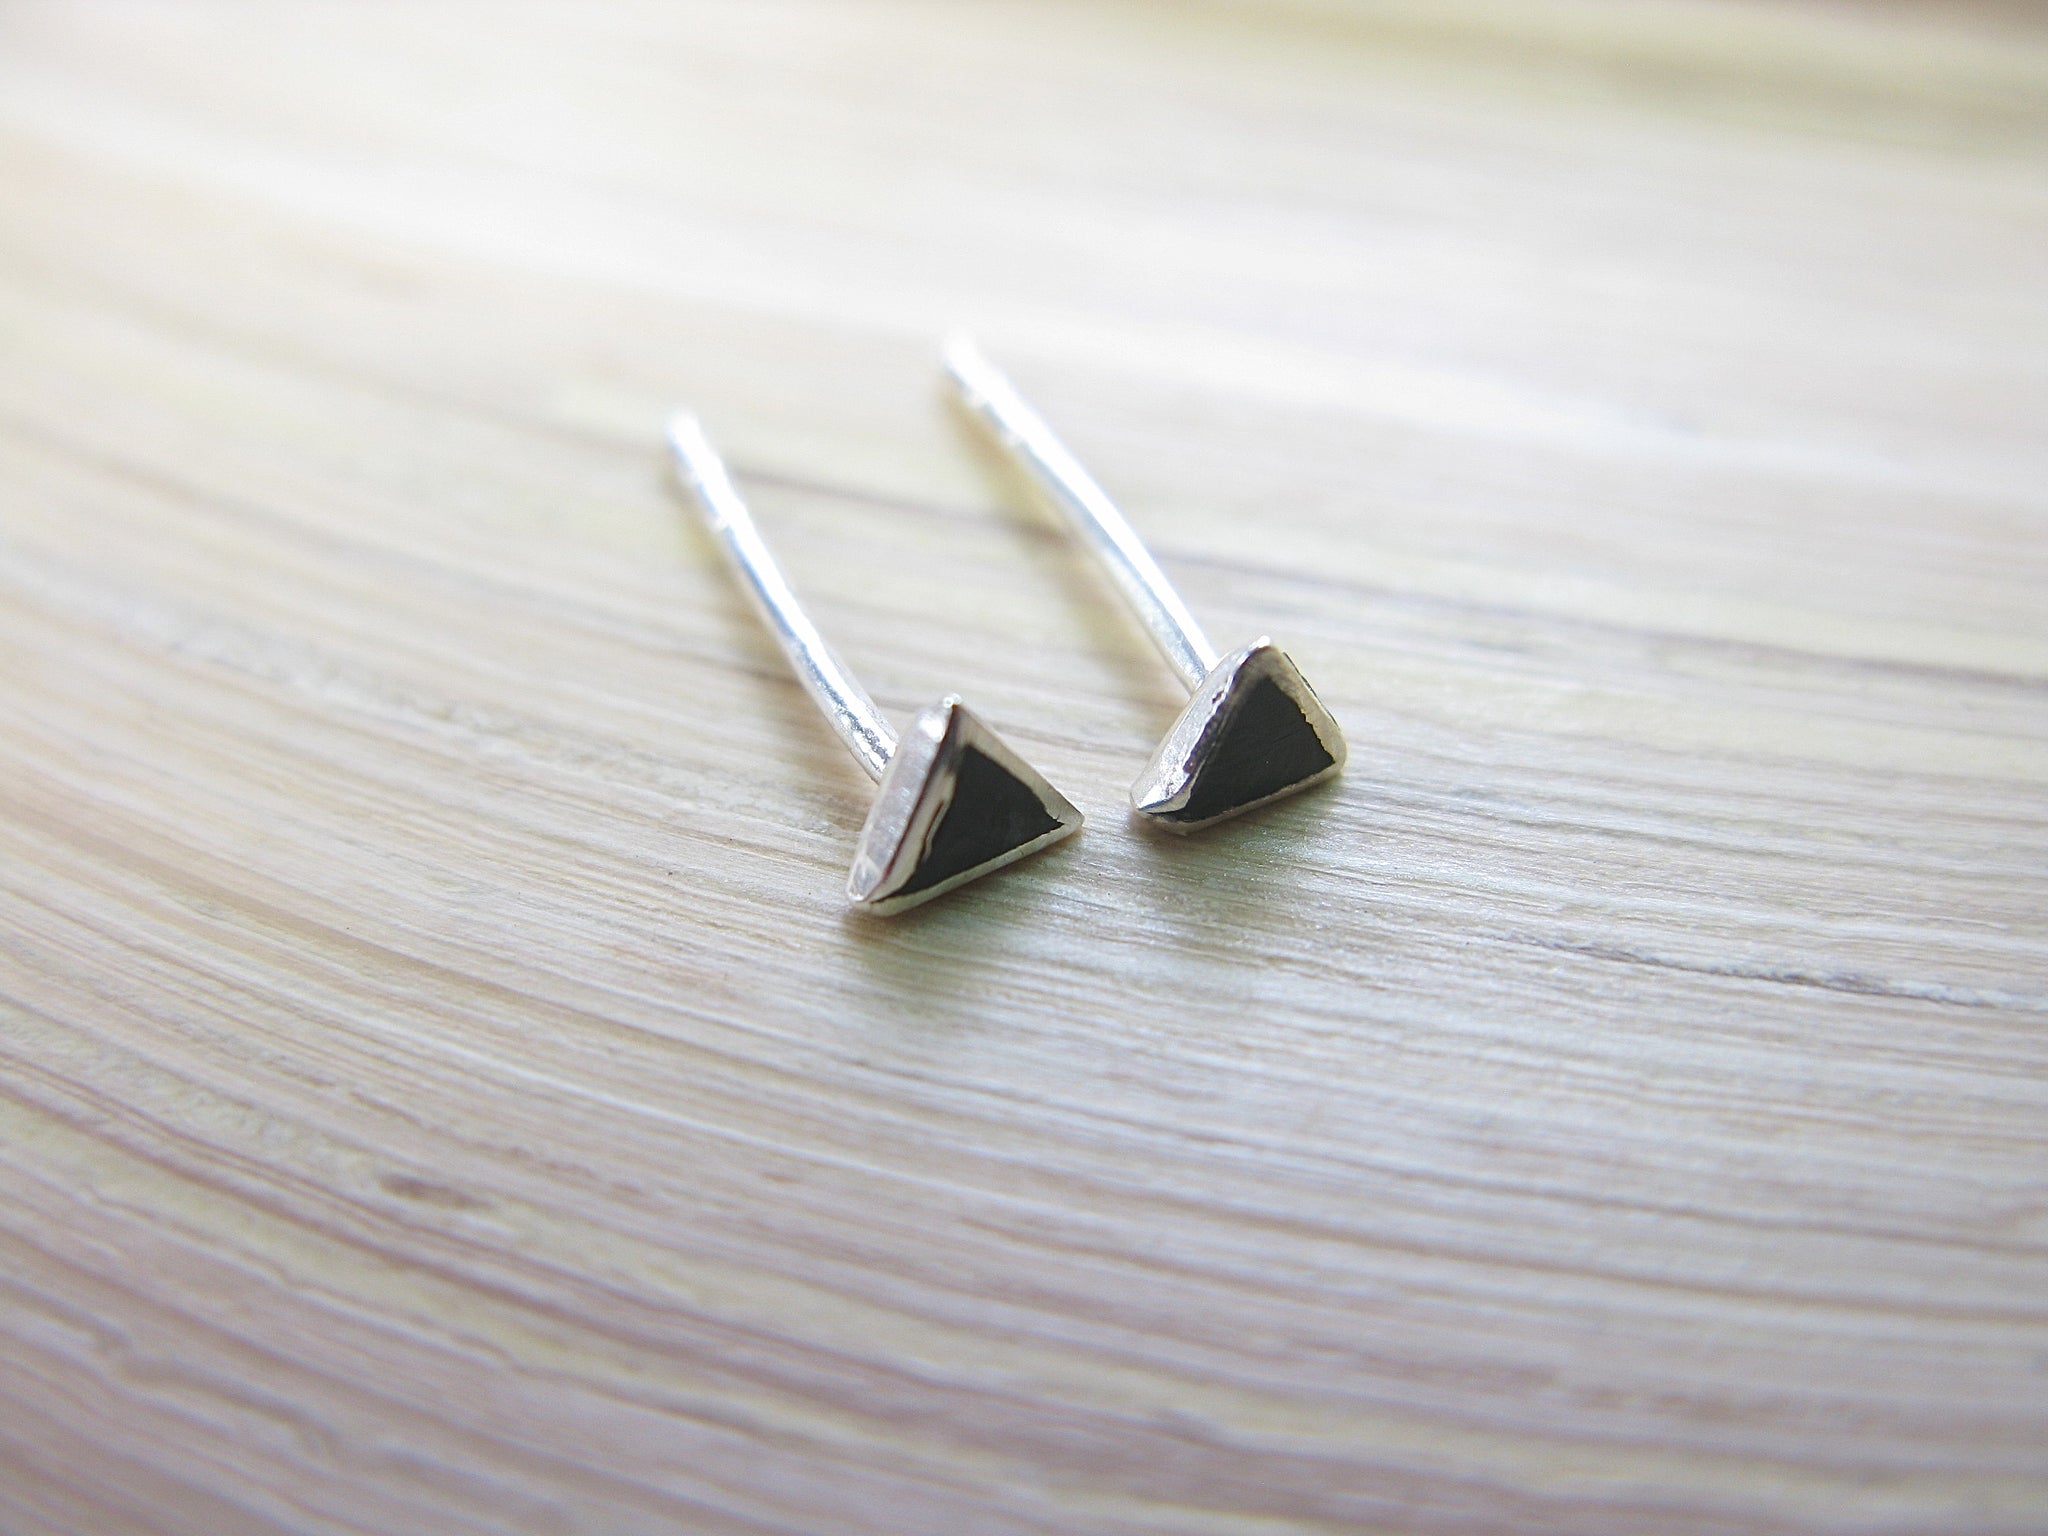 Onyx 3mm Tiny Triangle Stud Earrings in 925 Sterling Silver